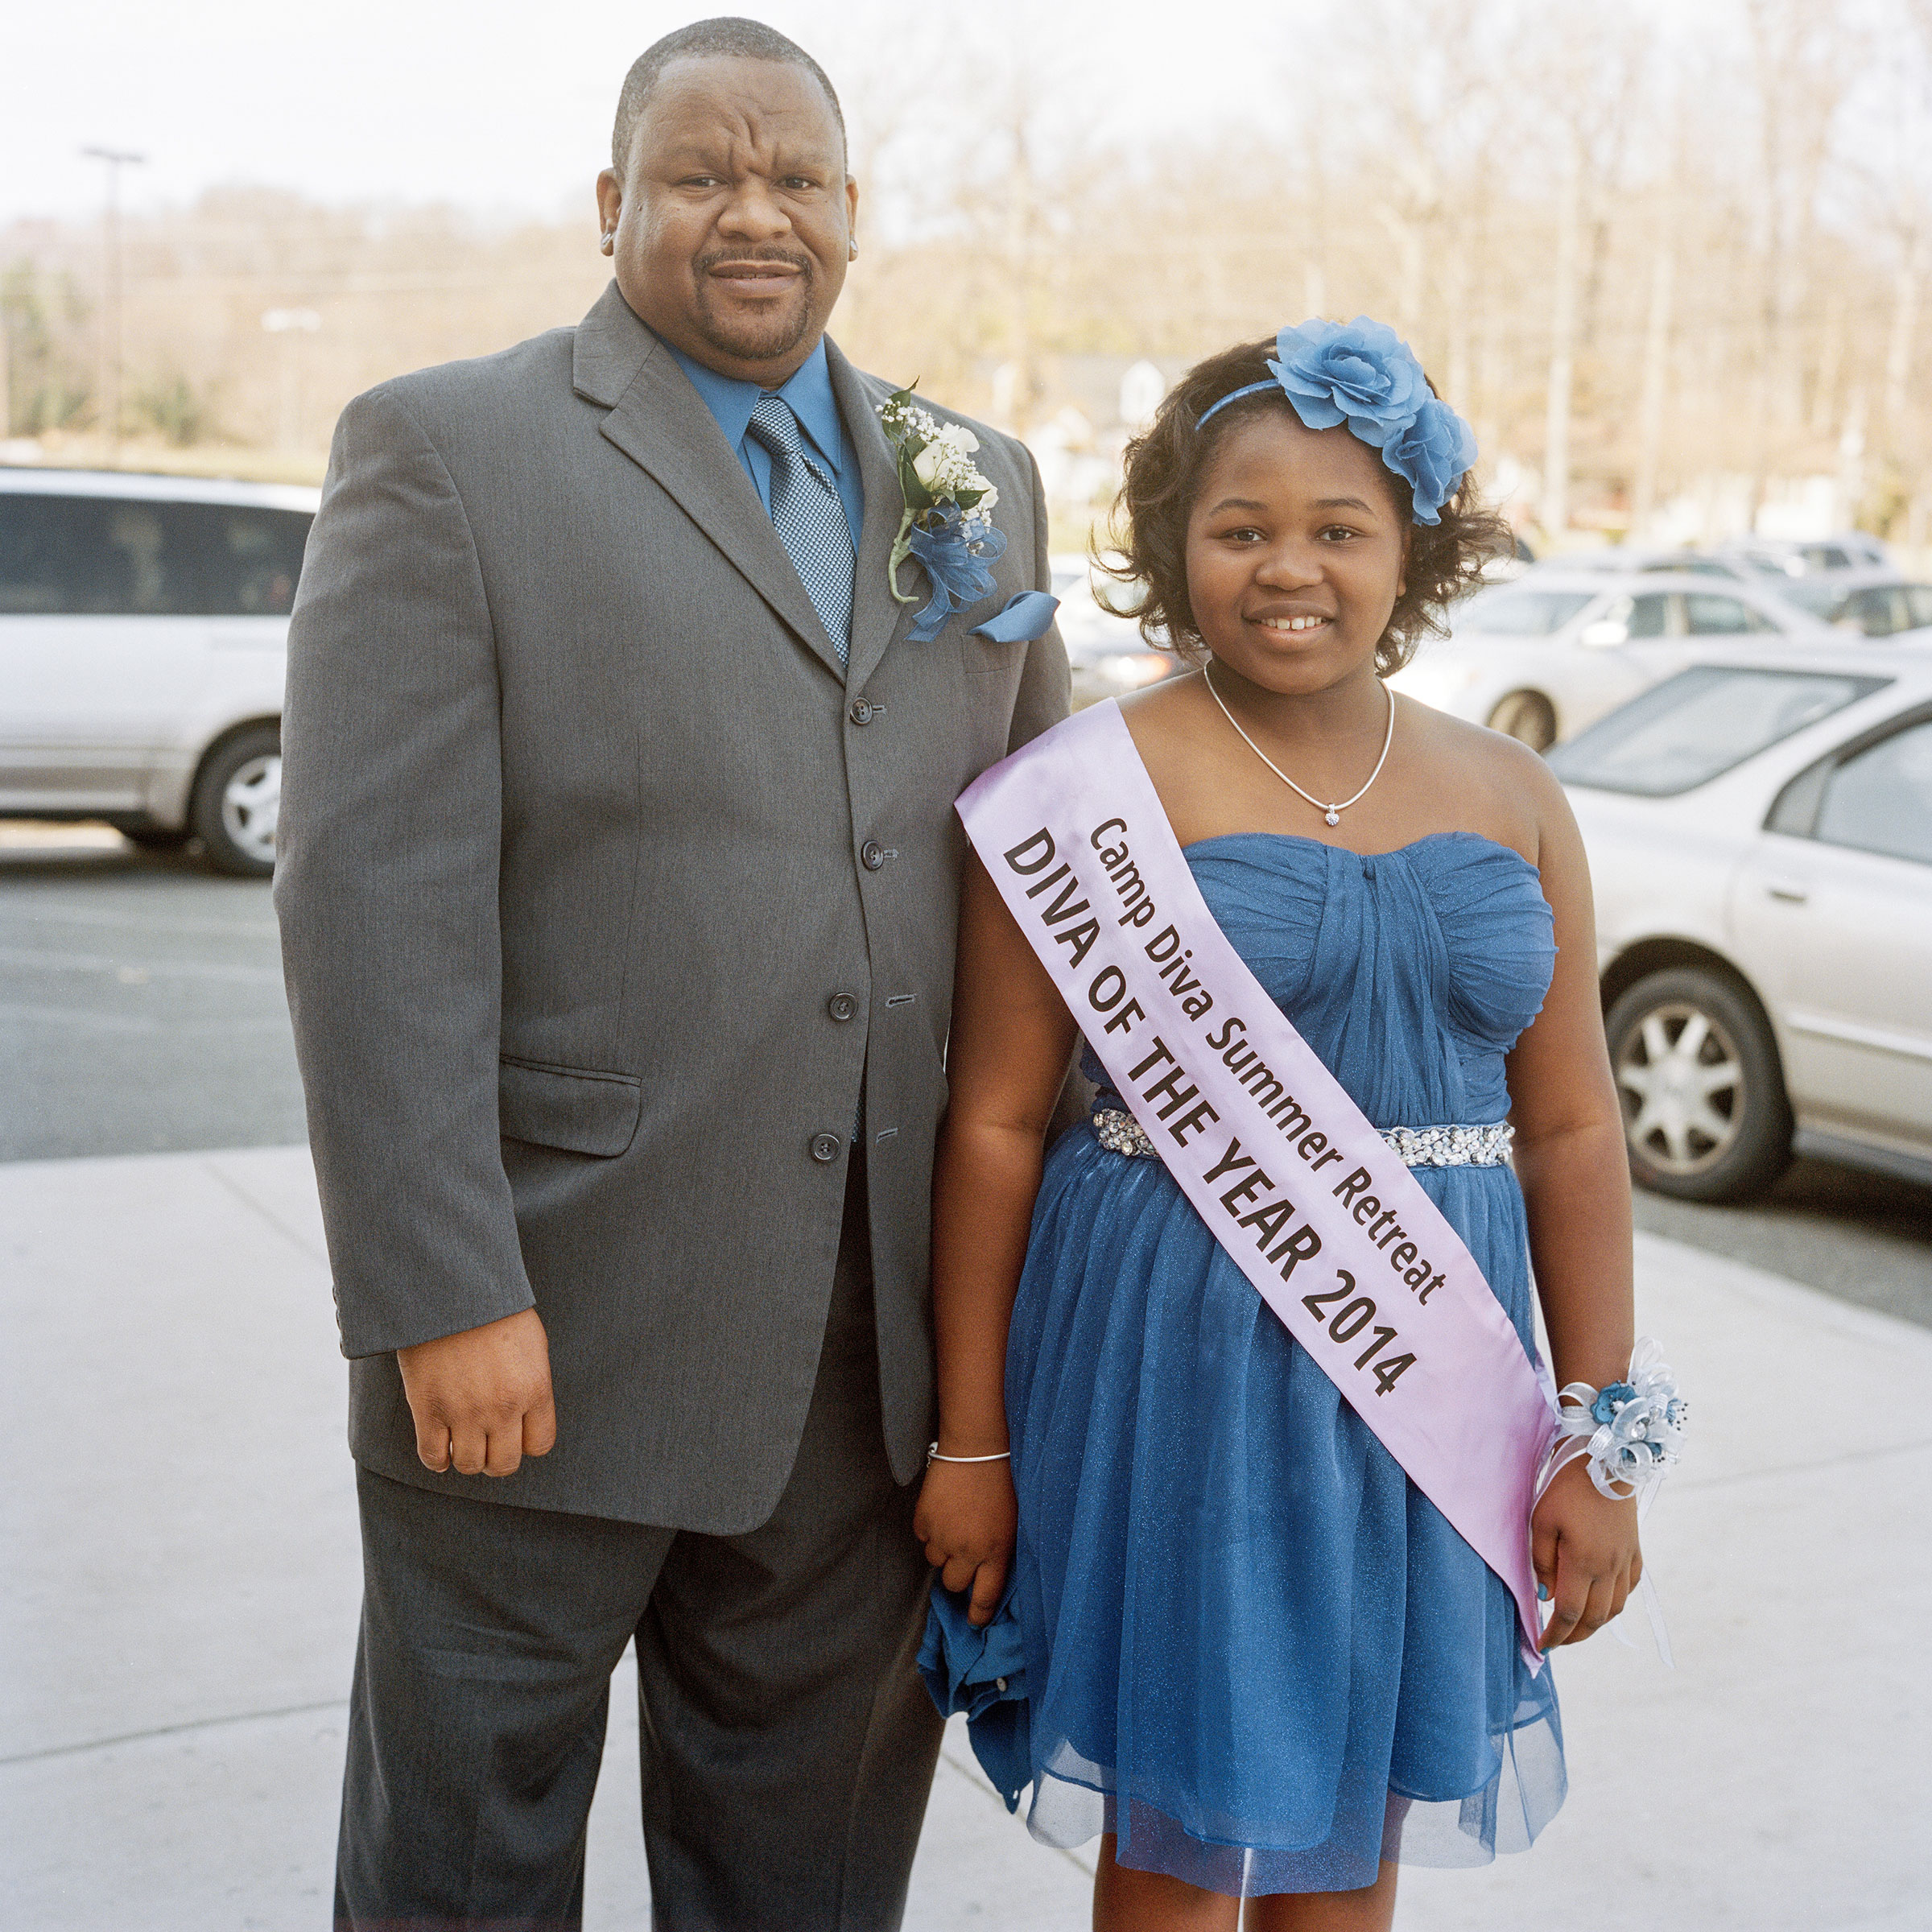 Jesse and his daughter, Ai-Zane’, at the “Date with Dad” dance, Richmond, VA 2015